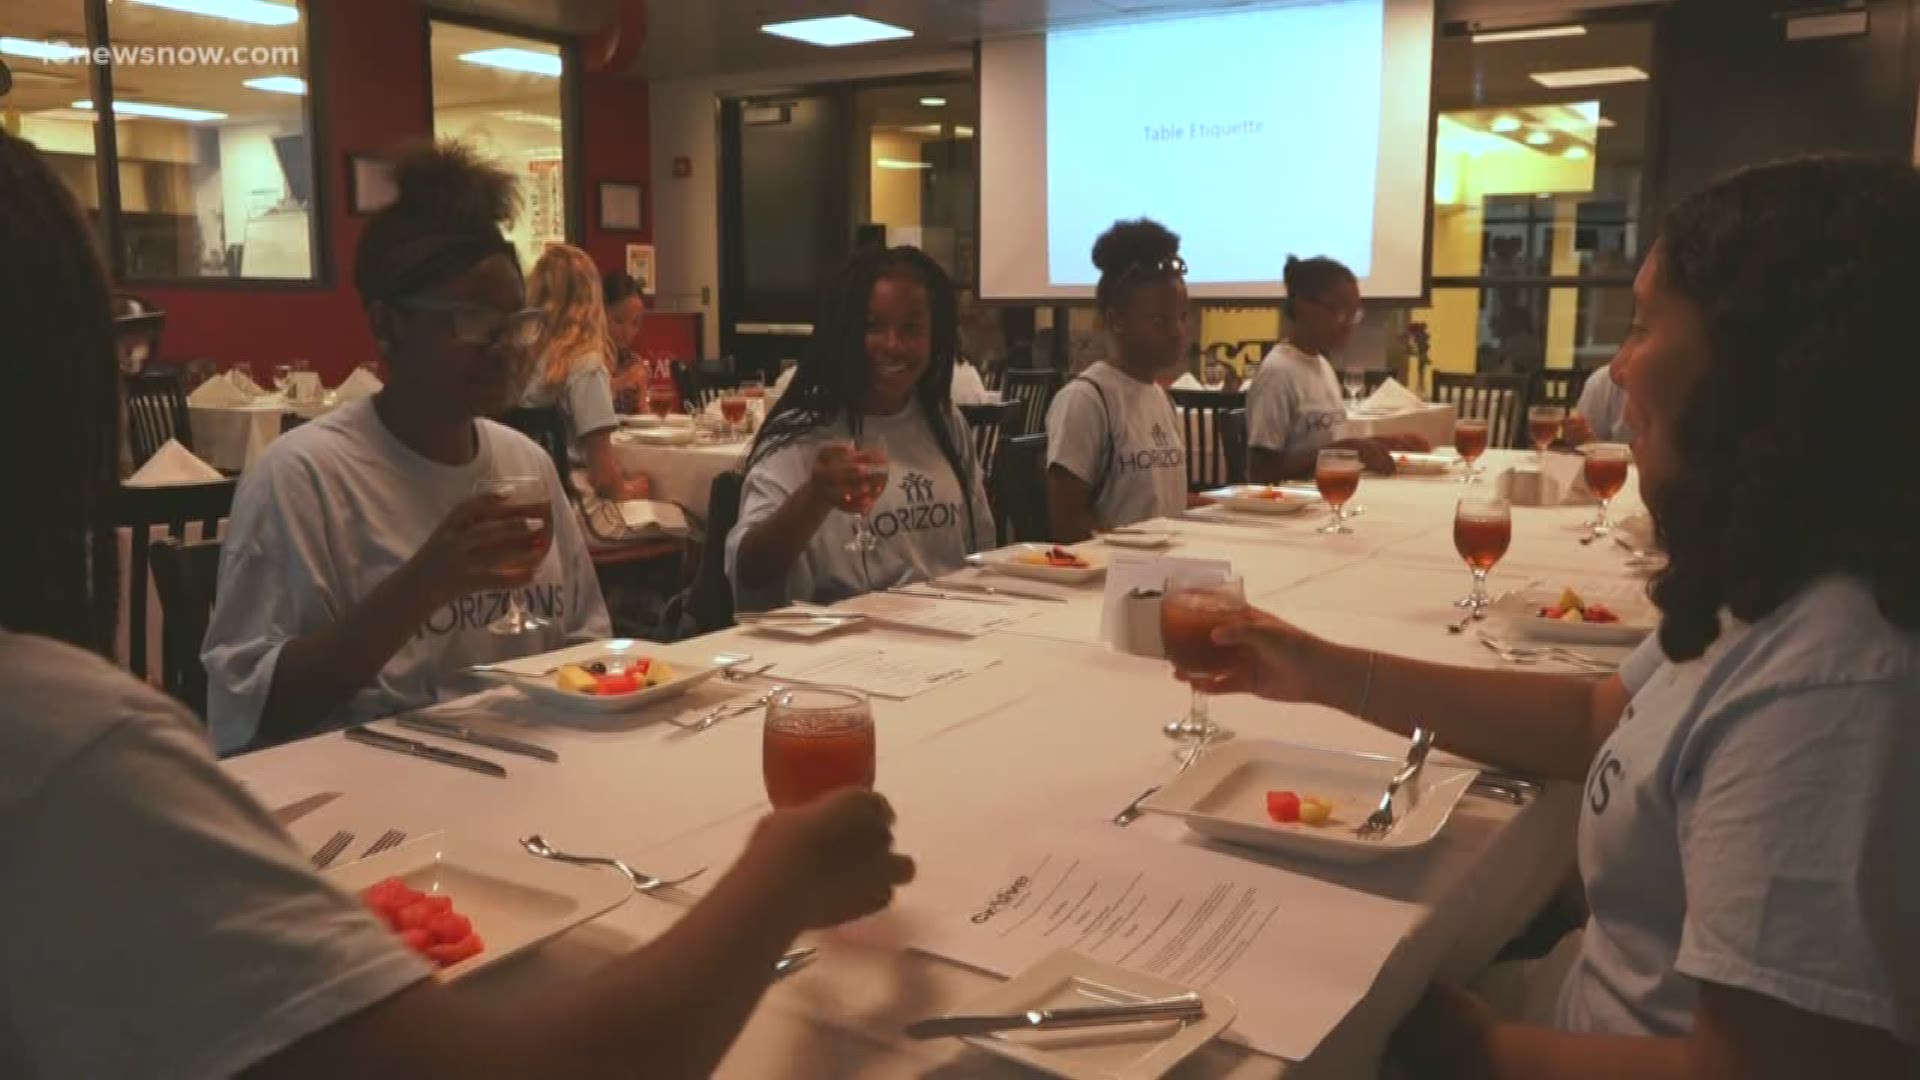 Students as part of the Horizon Summer program had an etiquette class at the Virginia Beach Art Institute's restaurant, CrAive. During the session, the students learned about careers in the culinary world courtesy of Chef Crystal Jones.